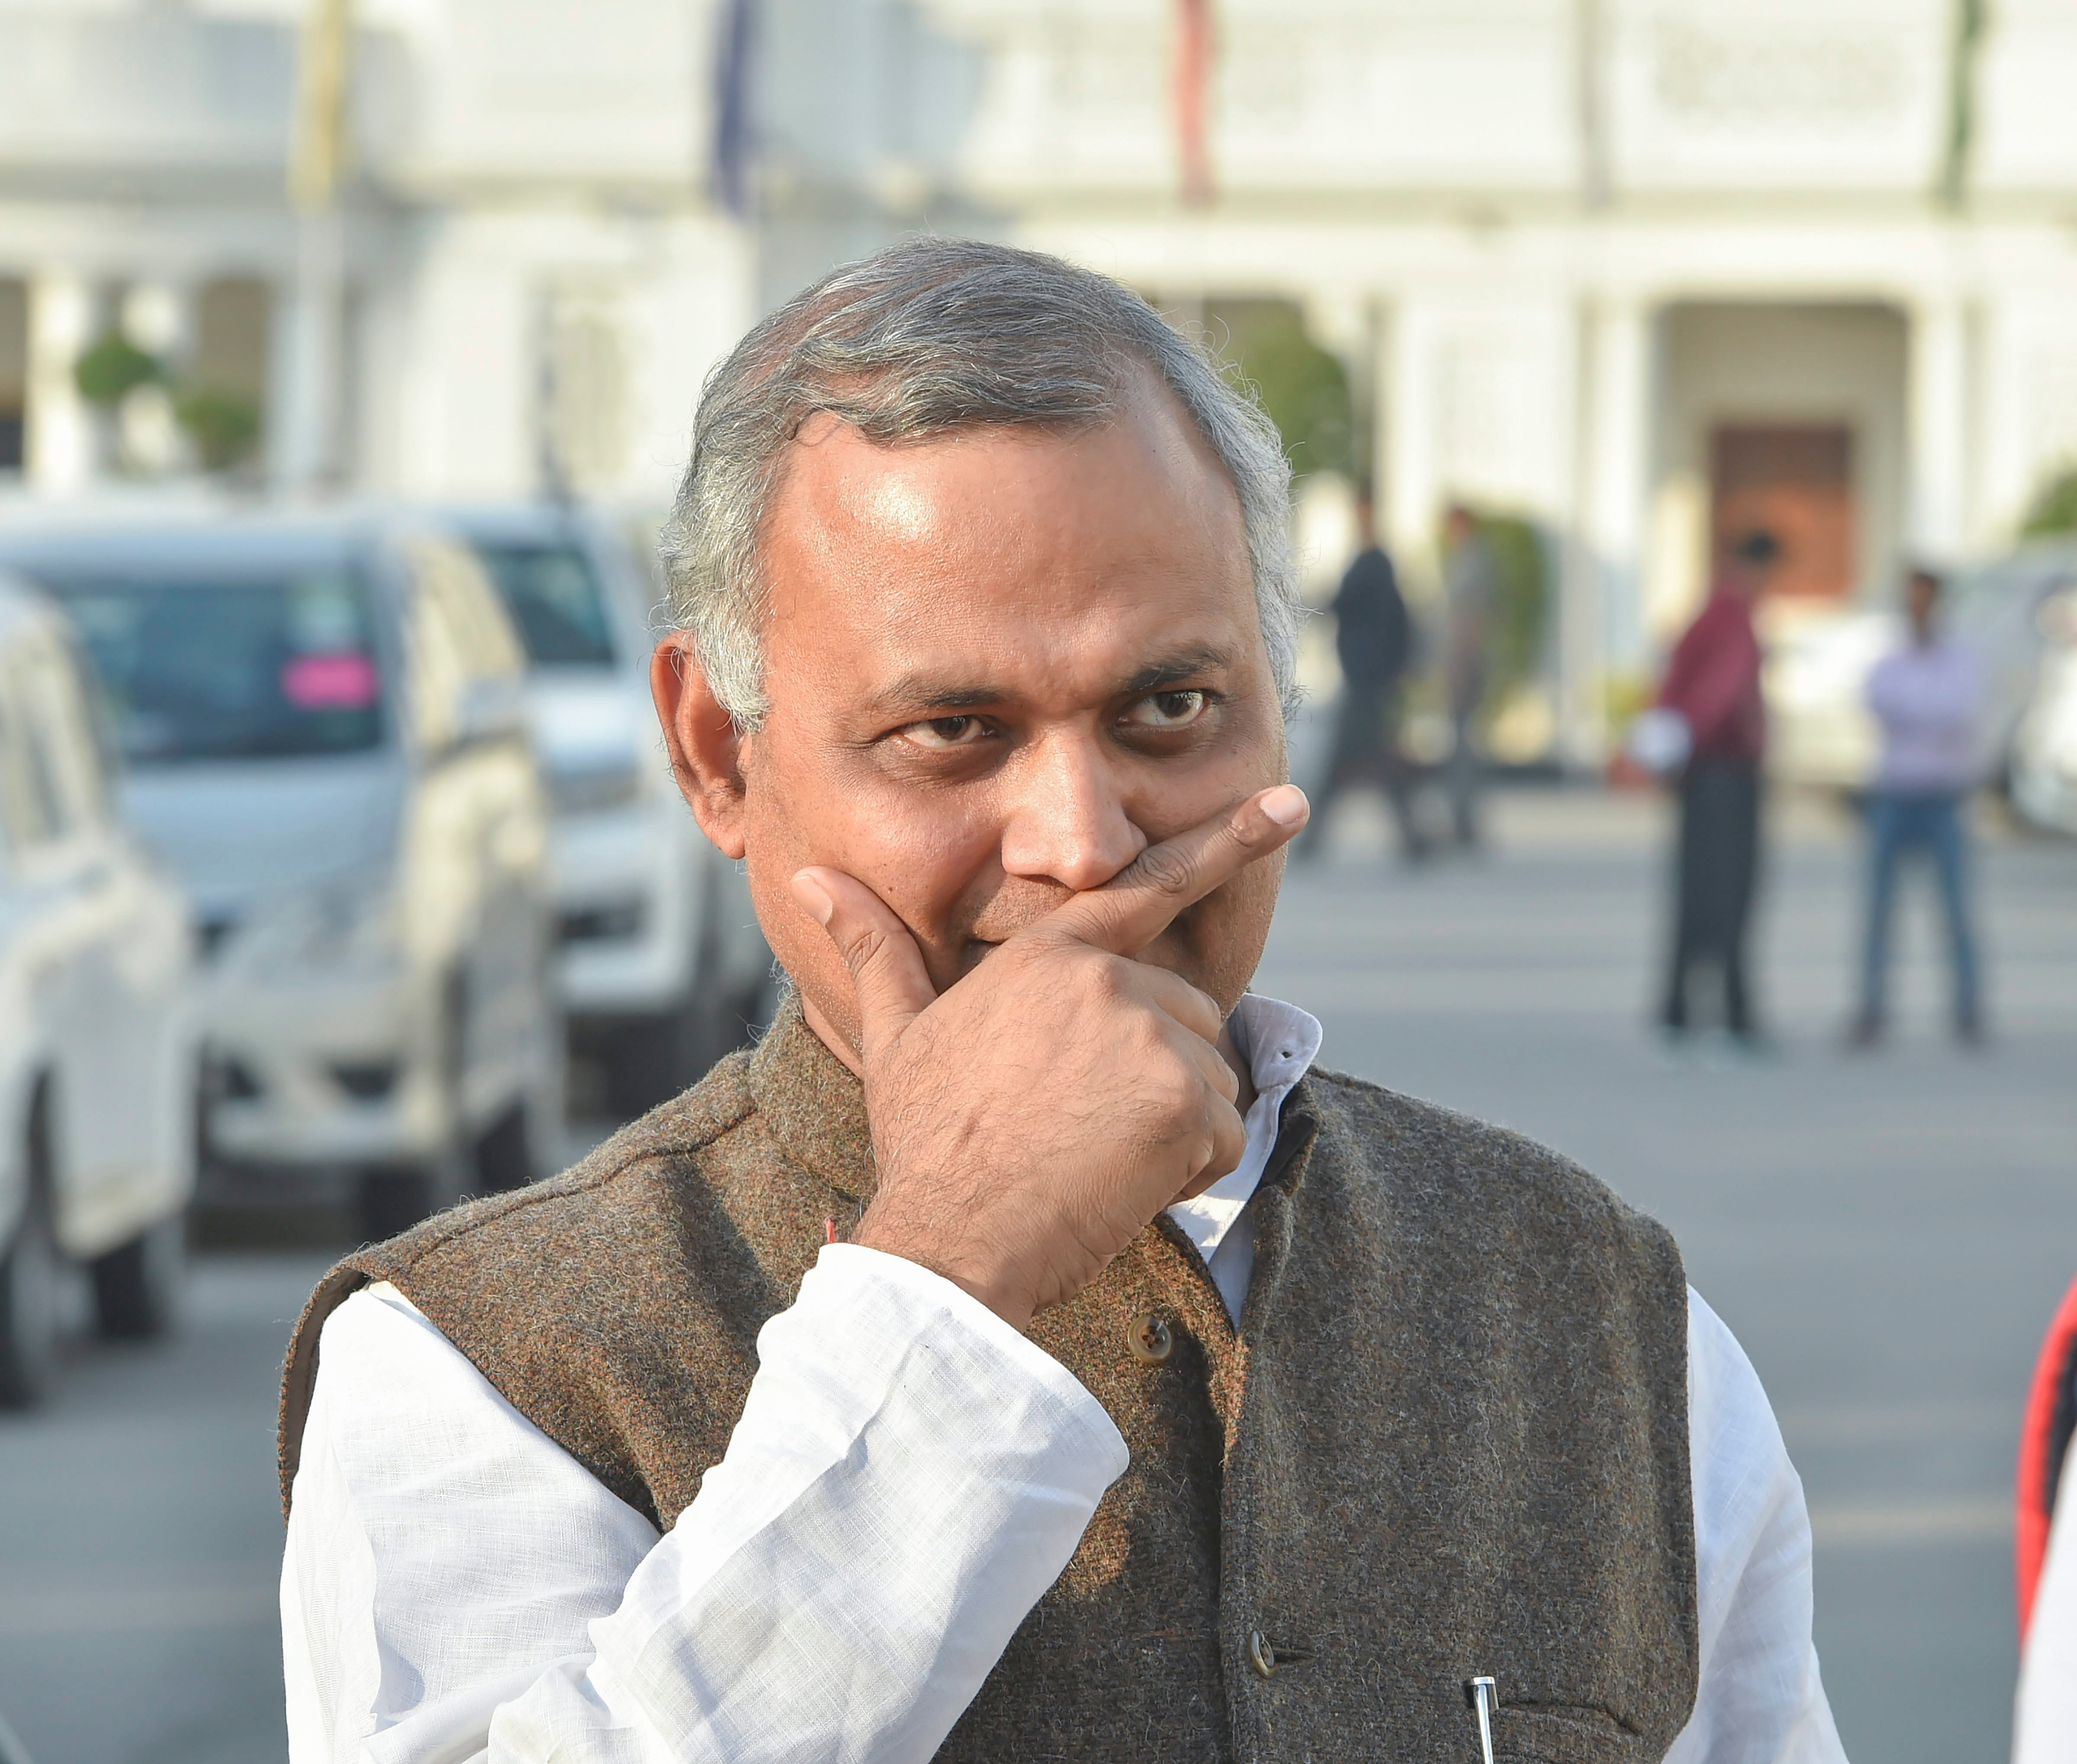 AAP MLA Somnath Bharti arrives to attend a special session of the Delhi Assembly, in New Delhi. Bharti was sentenced to two years in jail for assaulting the AIIMS security staff in a case registered in 2016, on Saturday, Jan. 23, 2021. Credit: PTI Photo